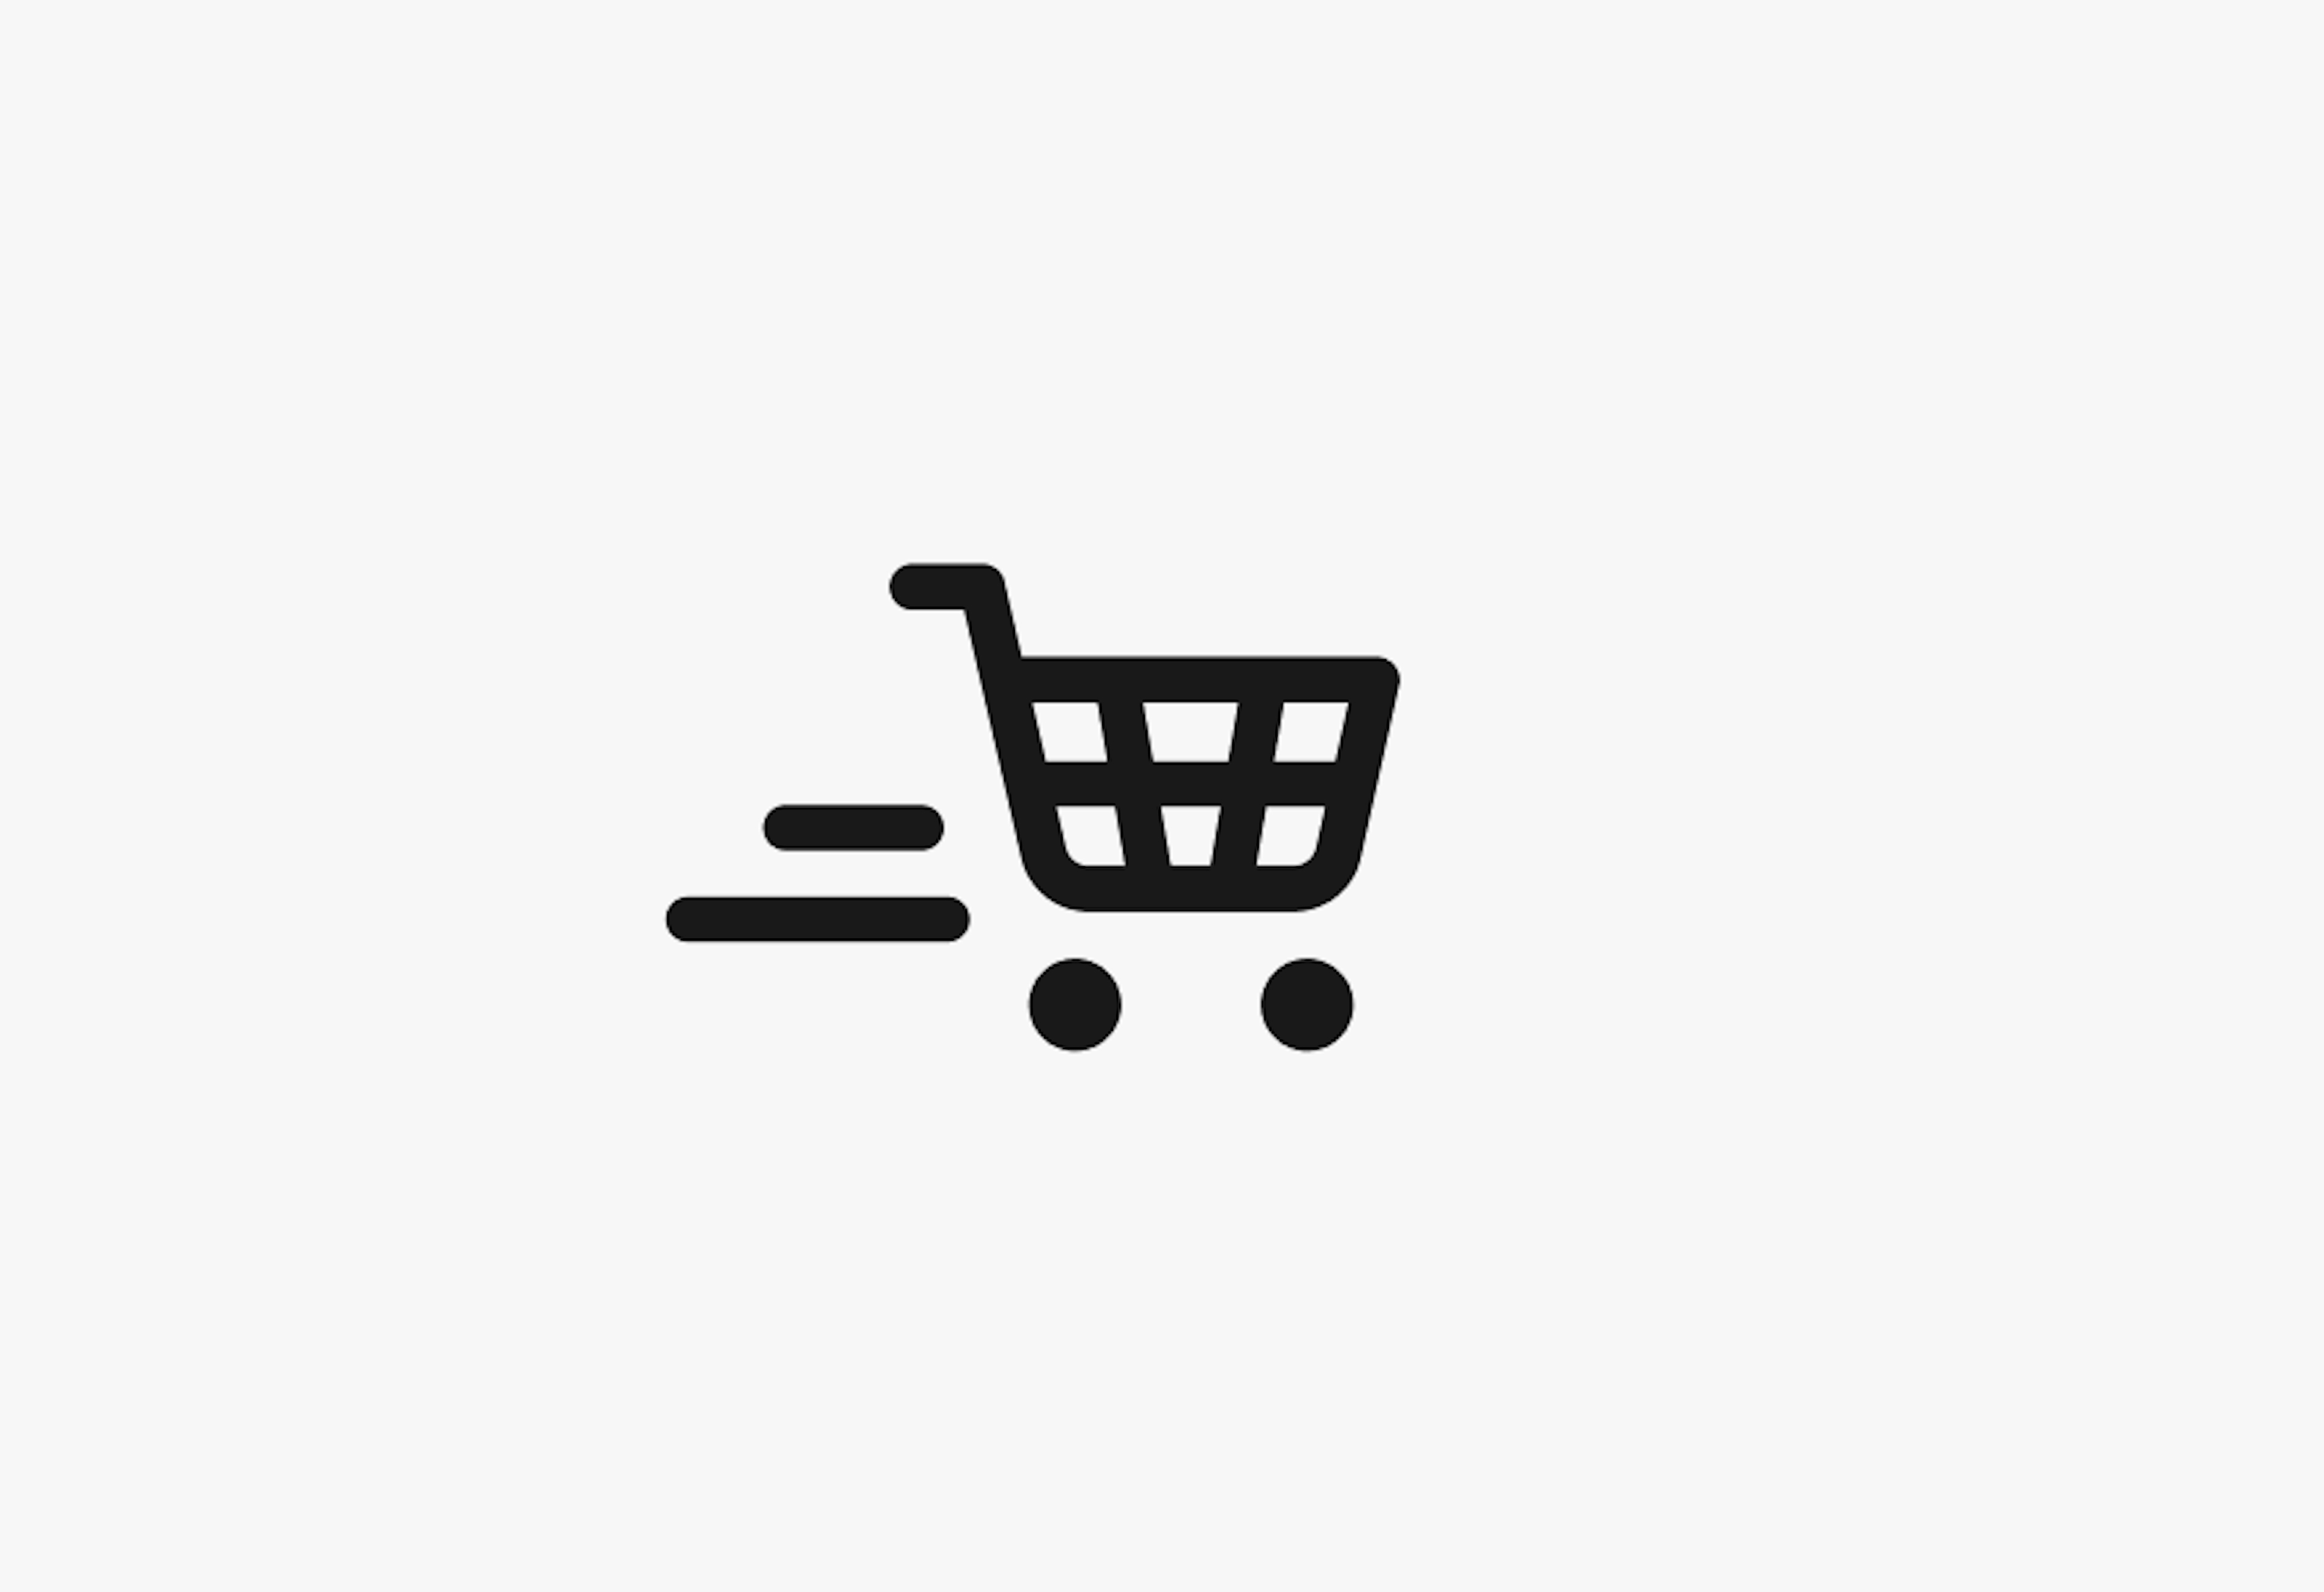 The cart icon with added lines and embellishments.